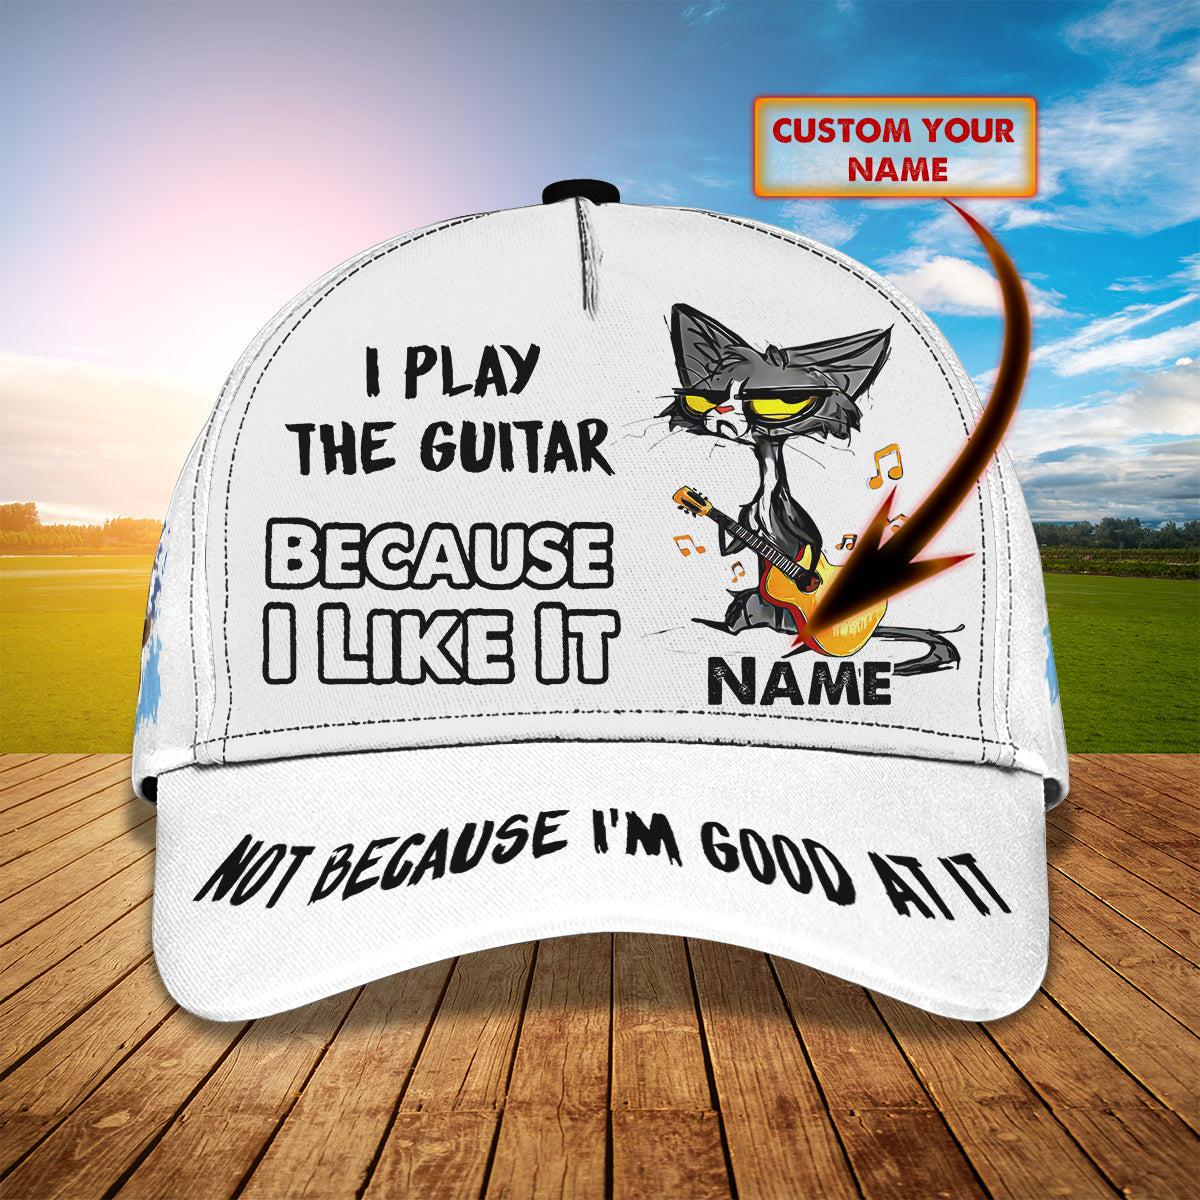 I Play The Guitar Because I Like It- Personalized Name Cap - Loop- T2k-243